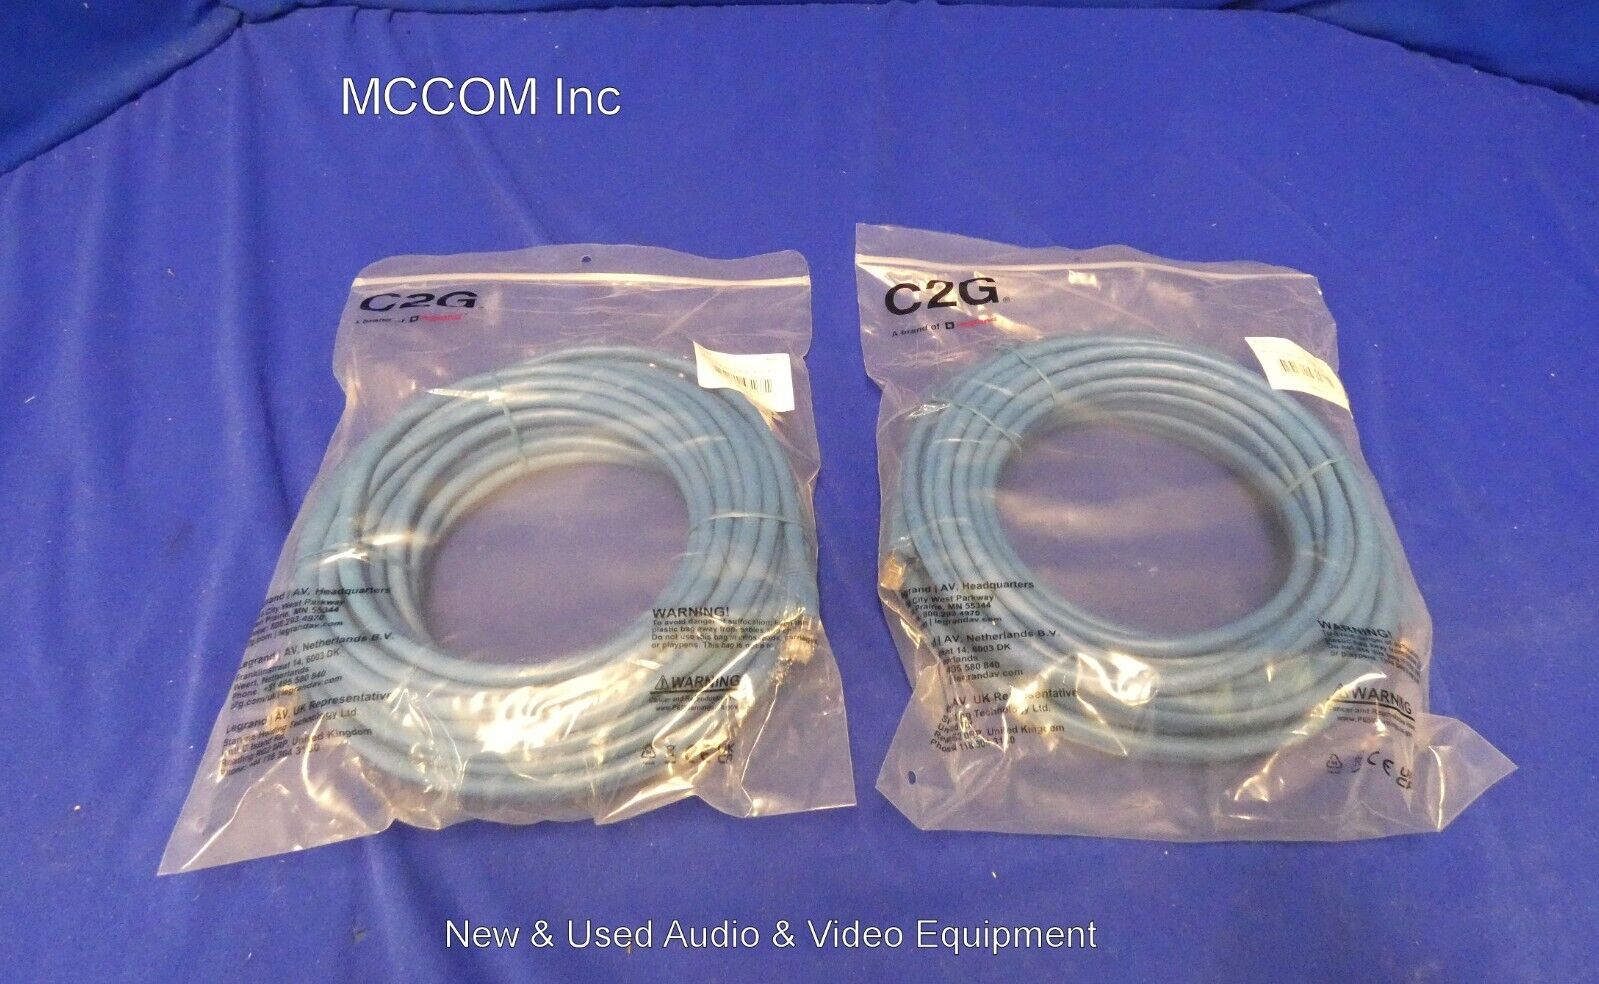 Legrand C2G 43167 50ft Cat6 Solid Shielded Ethernet Patch Cable Qty 2 New